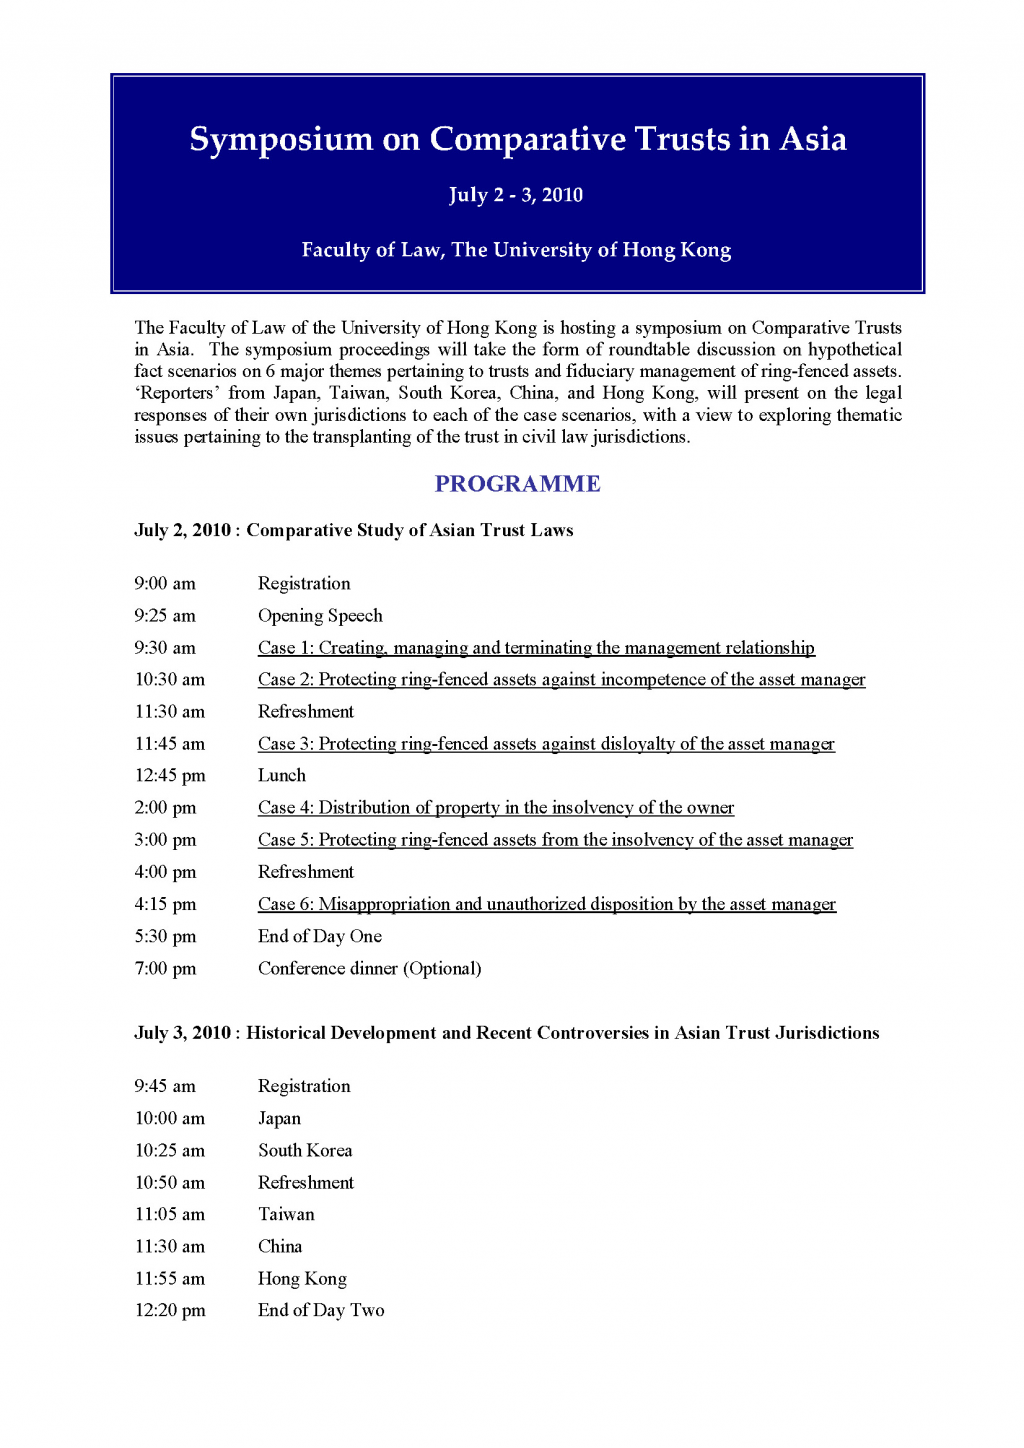 Symposium on Comparative Trusts in Asia